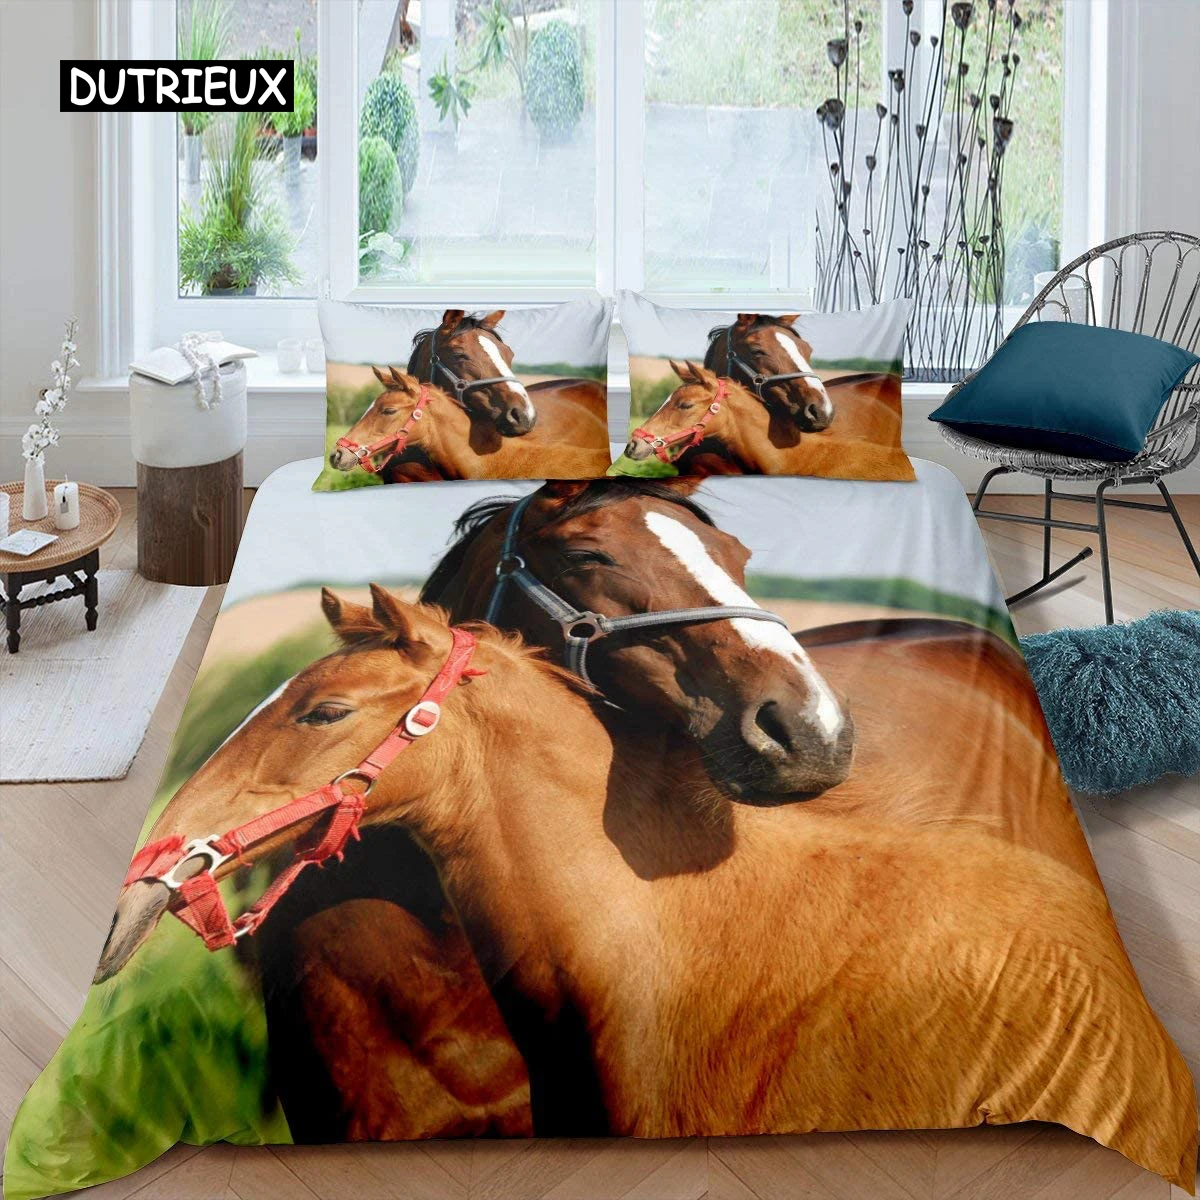 

Horse Duvet Cover Farm Animal Pattern Brown Horse Lover Bedding Set Microfiber Bedspread Cover for Teens Adult Queen Quilt Cover